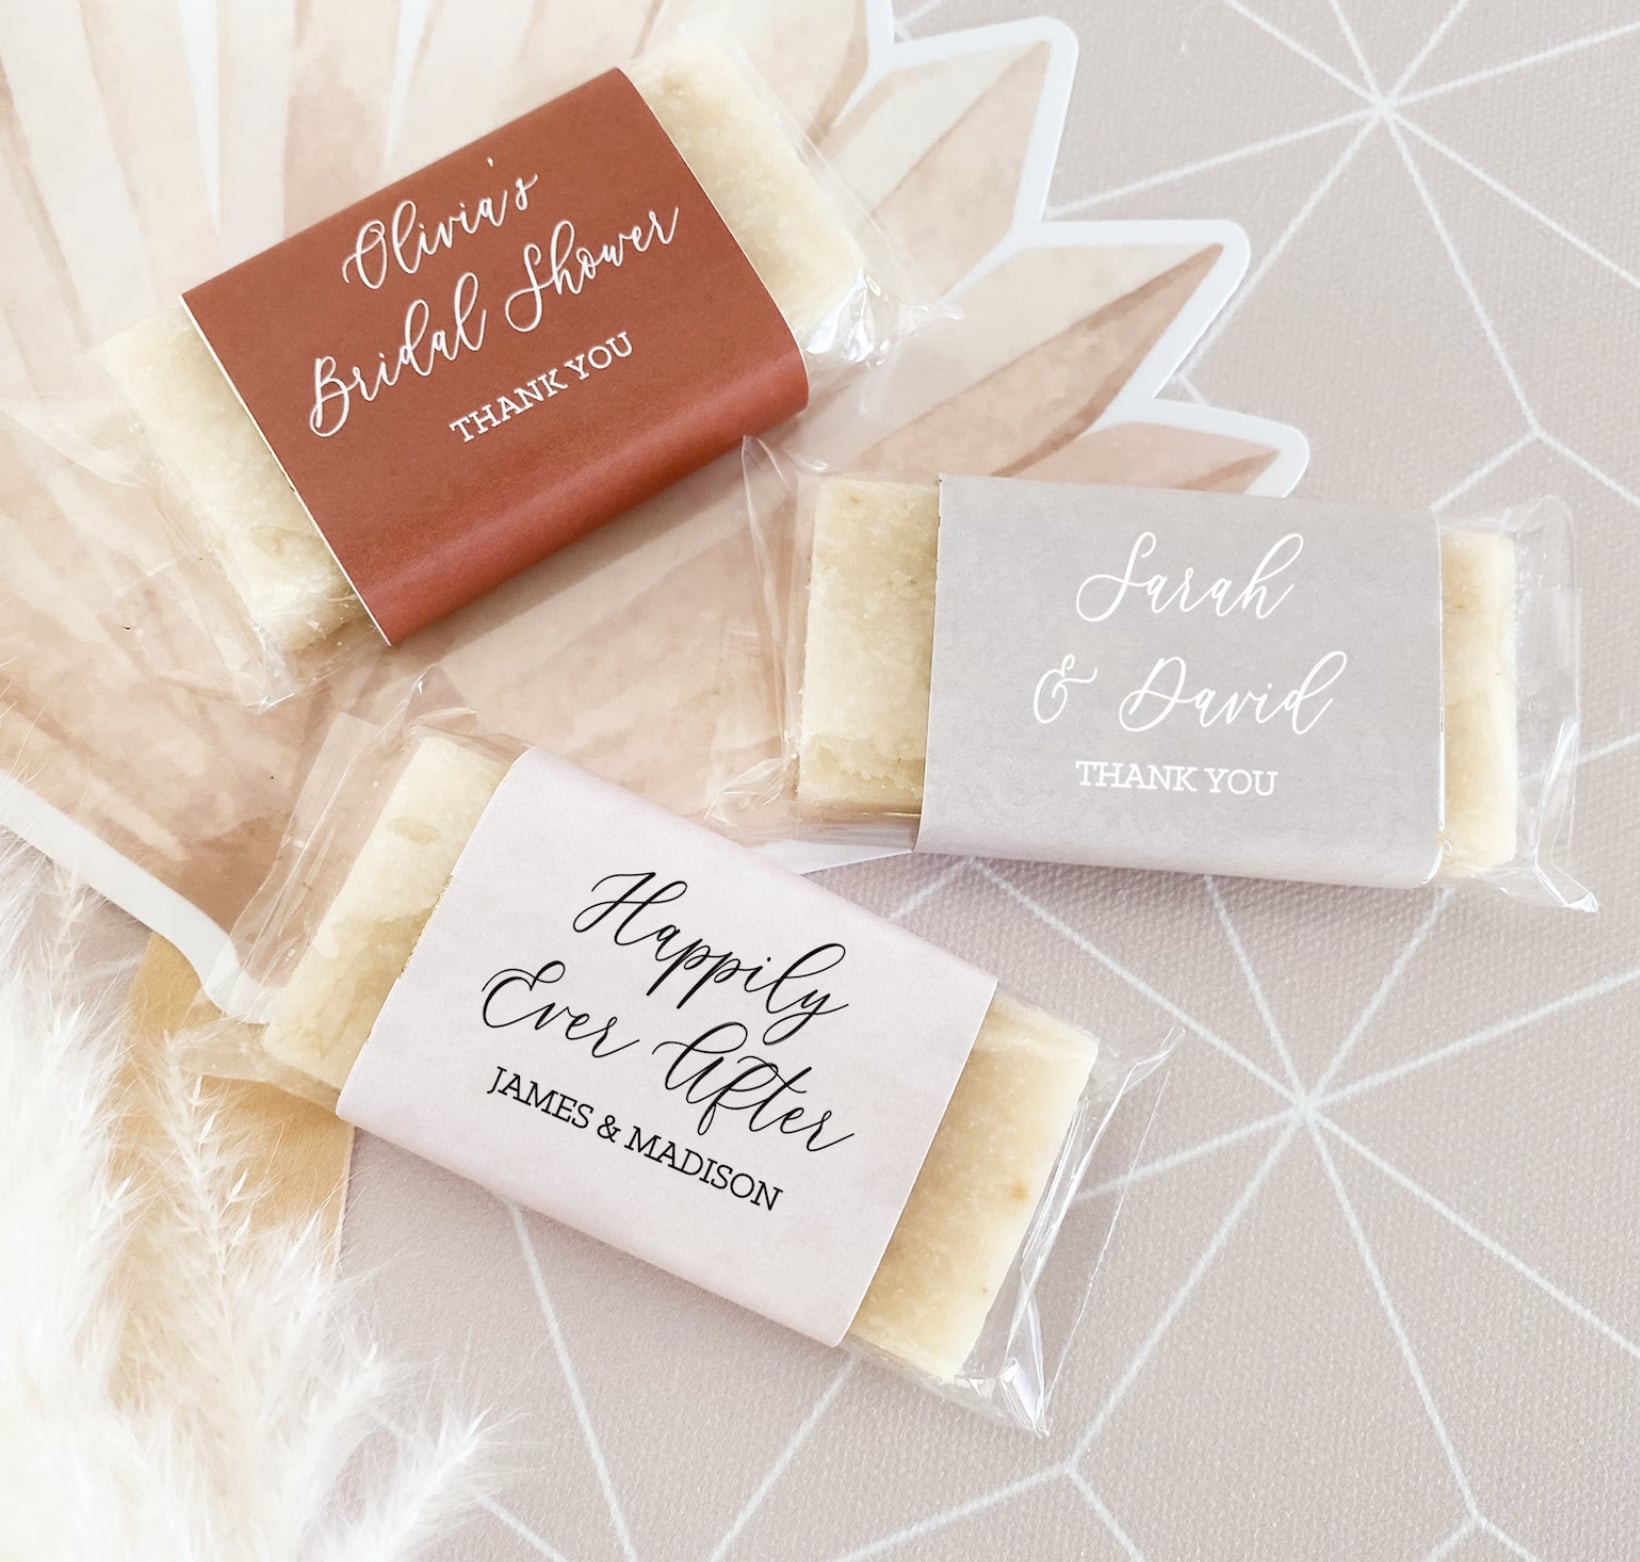 57 Thoughtful Wedding Favor Ideas for Your Guests - Zola Expert